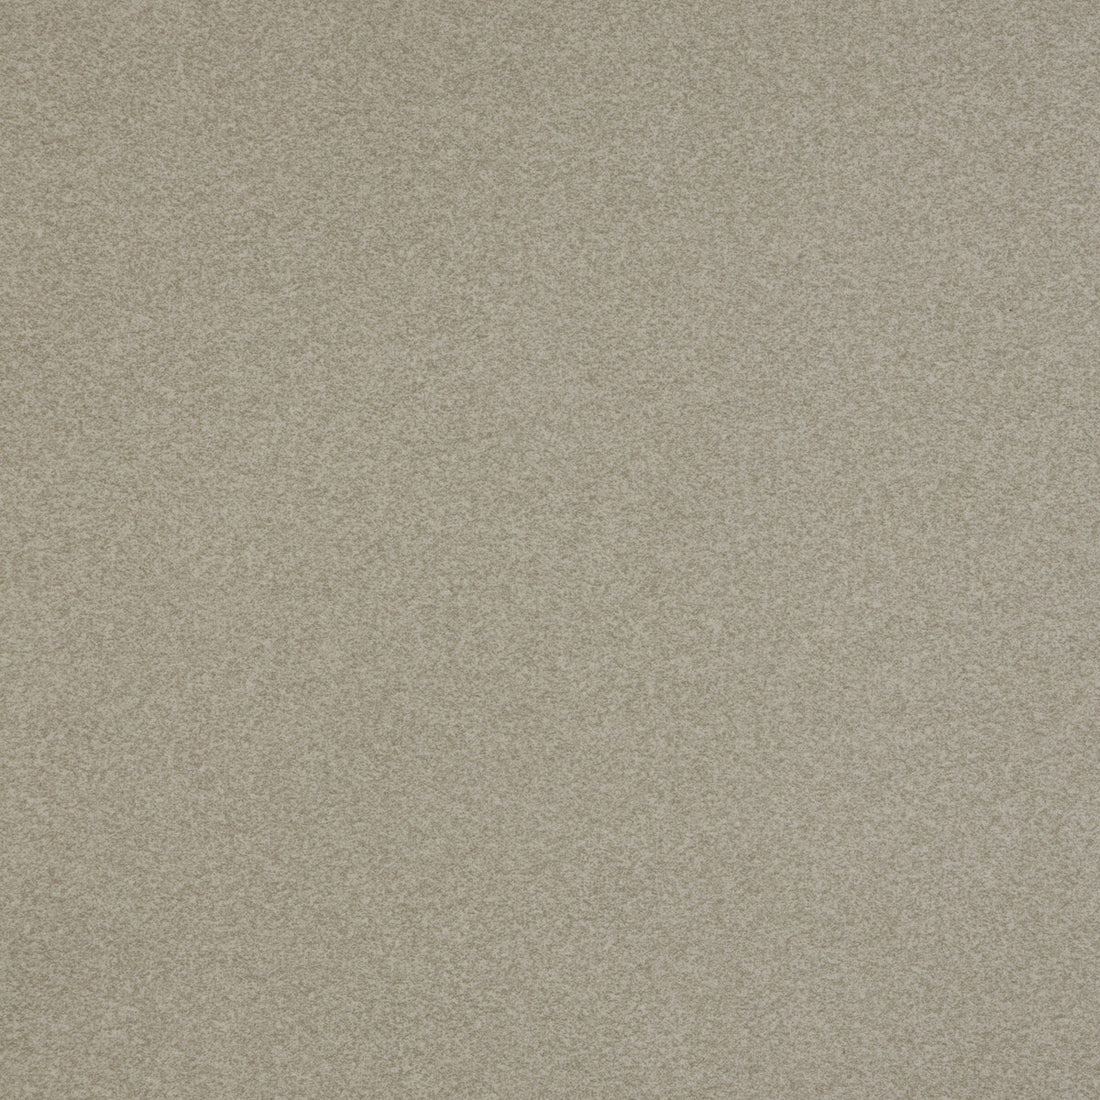 Heathered fabric in sand color - pattern HEATHERED.106.0 - by Kravet Design in the Performance collection